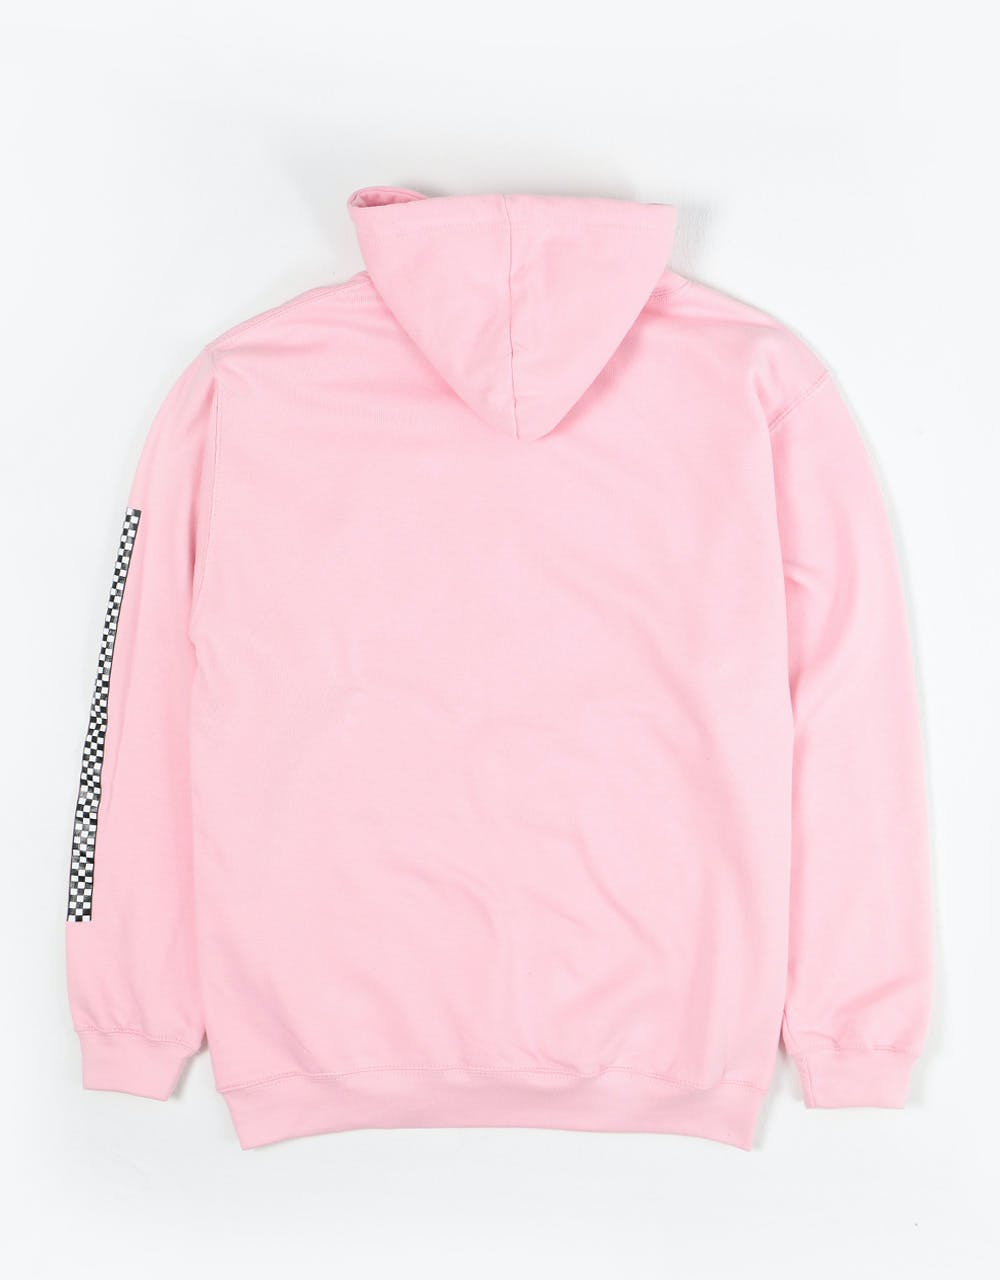 Salon Skateboards Kitty Cats Pullover Hoodie - Pink